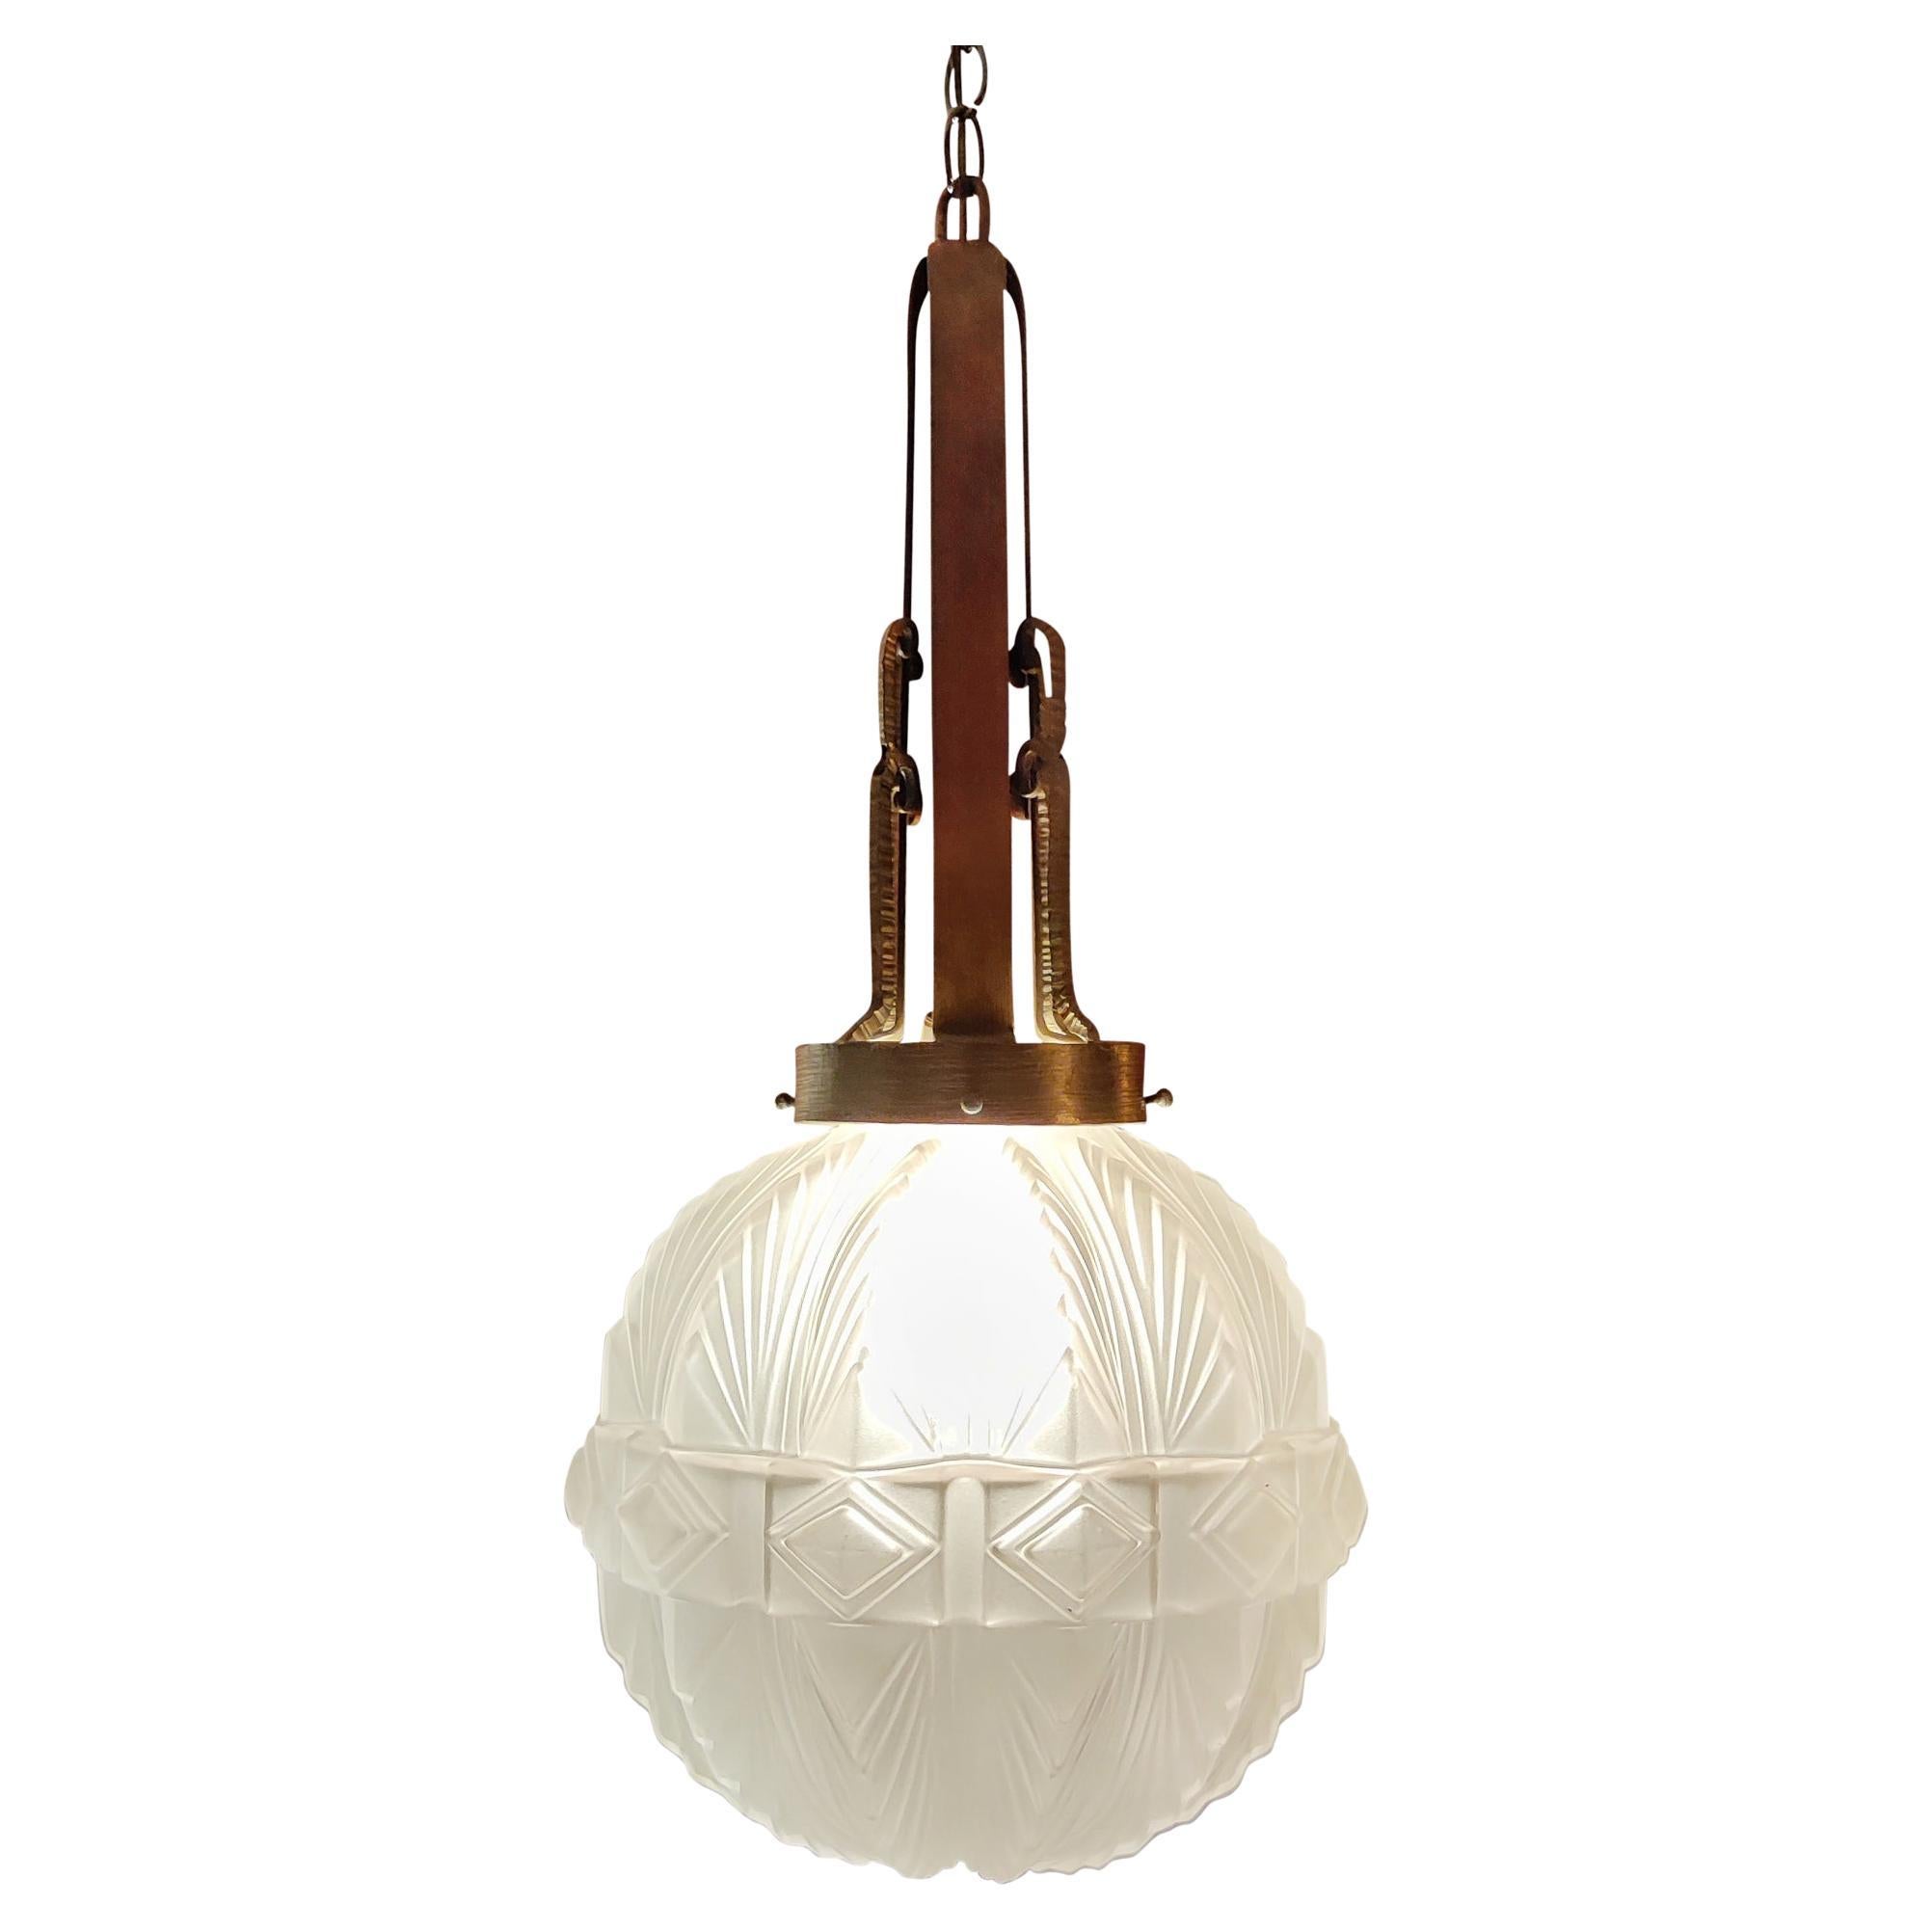 Sabino Art Deco Lantern Chandelier Frosted Glass Nickeled Steel, France, 1920s For Sale